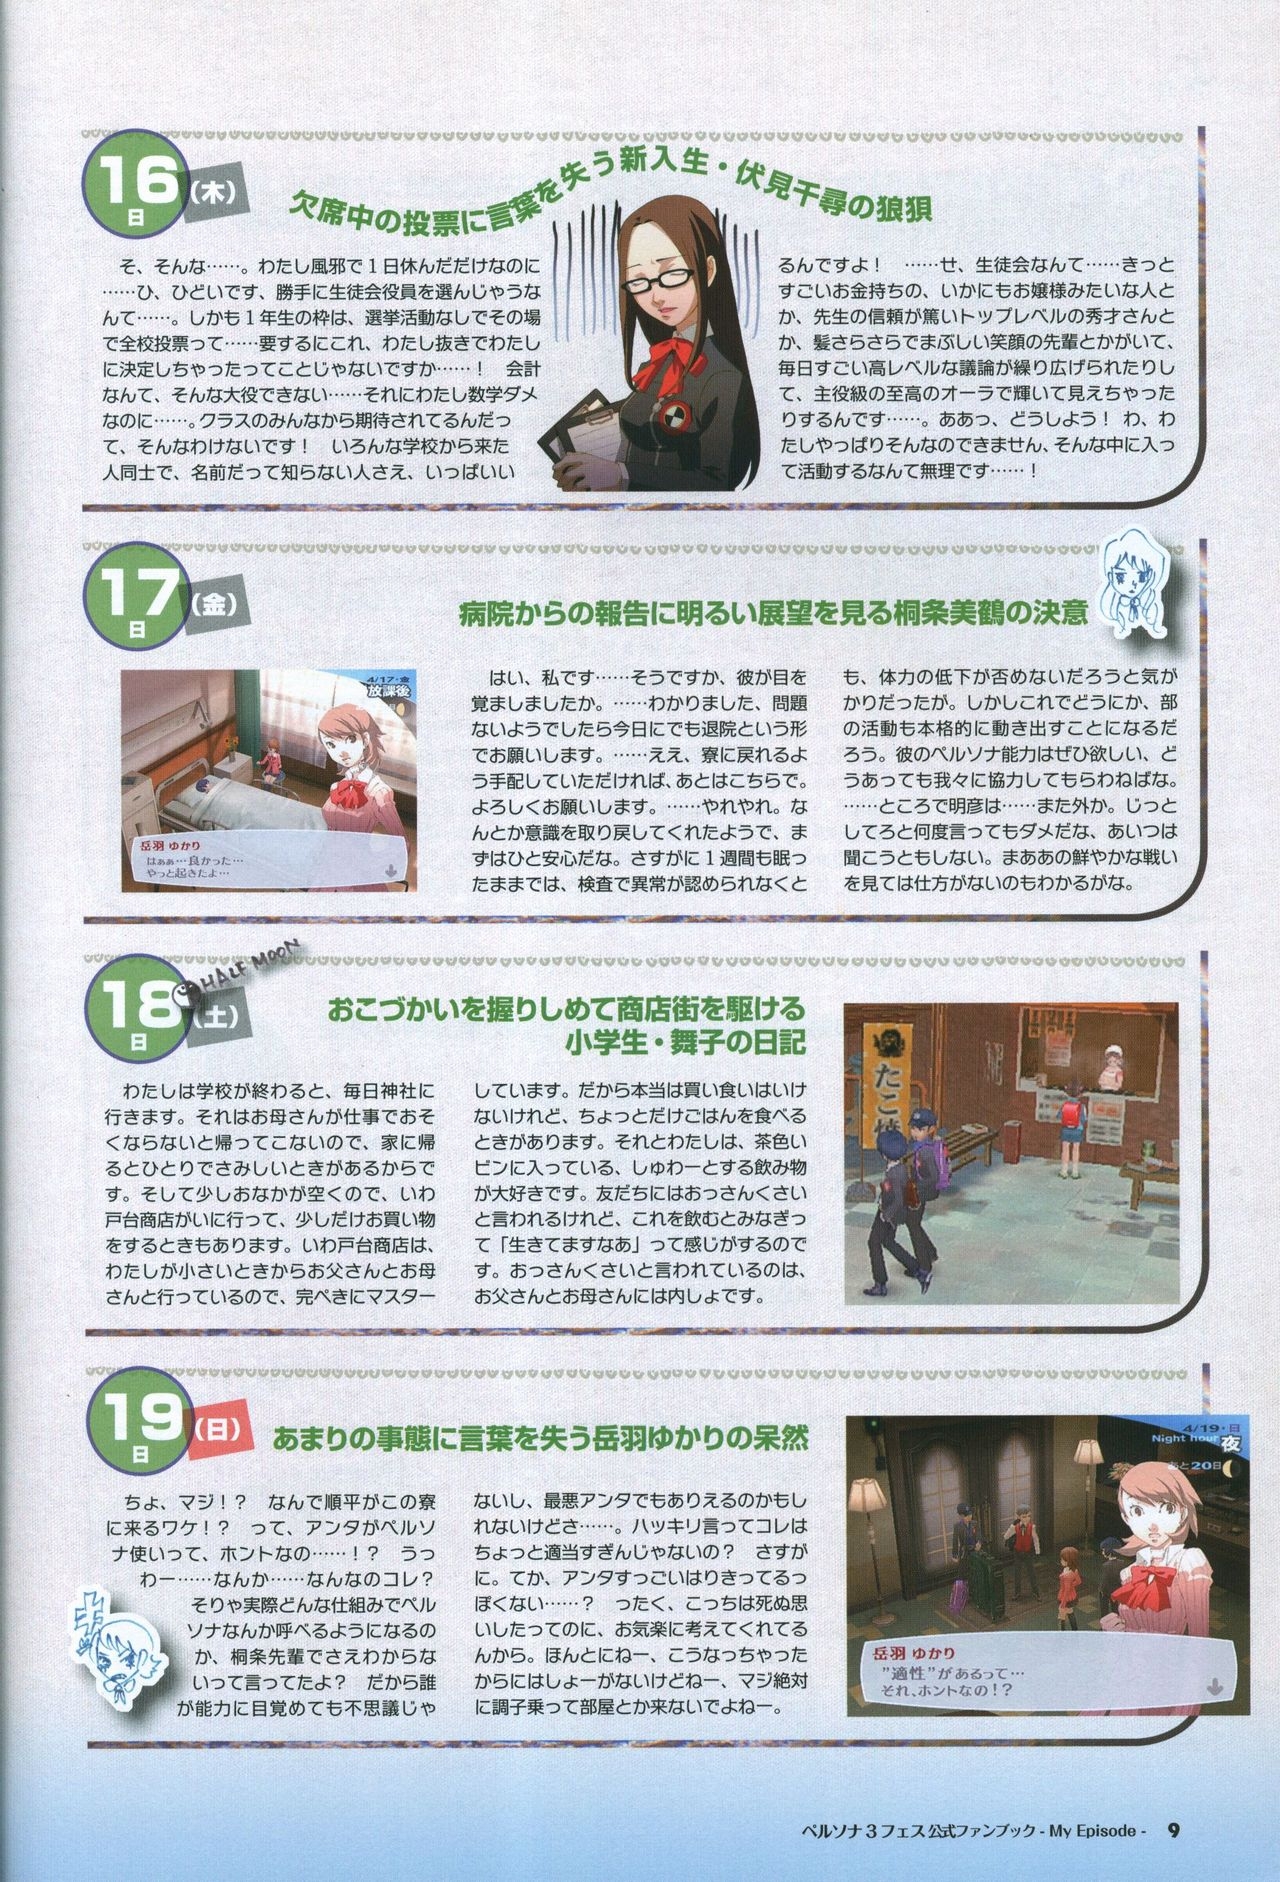 Persona 3 Fes Official Fan Book -My Episode- 10